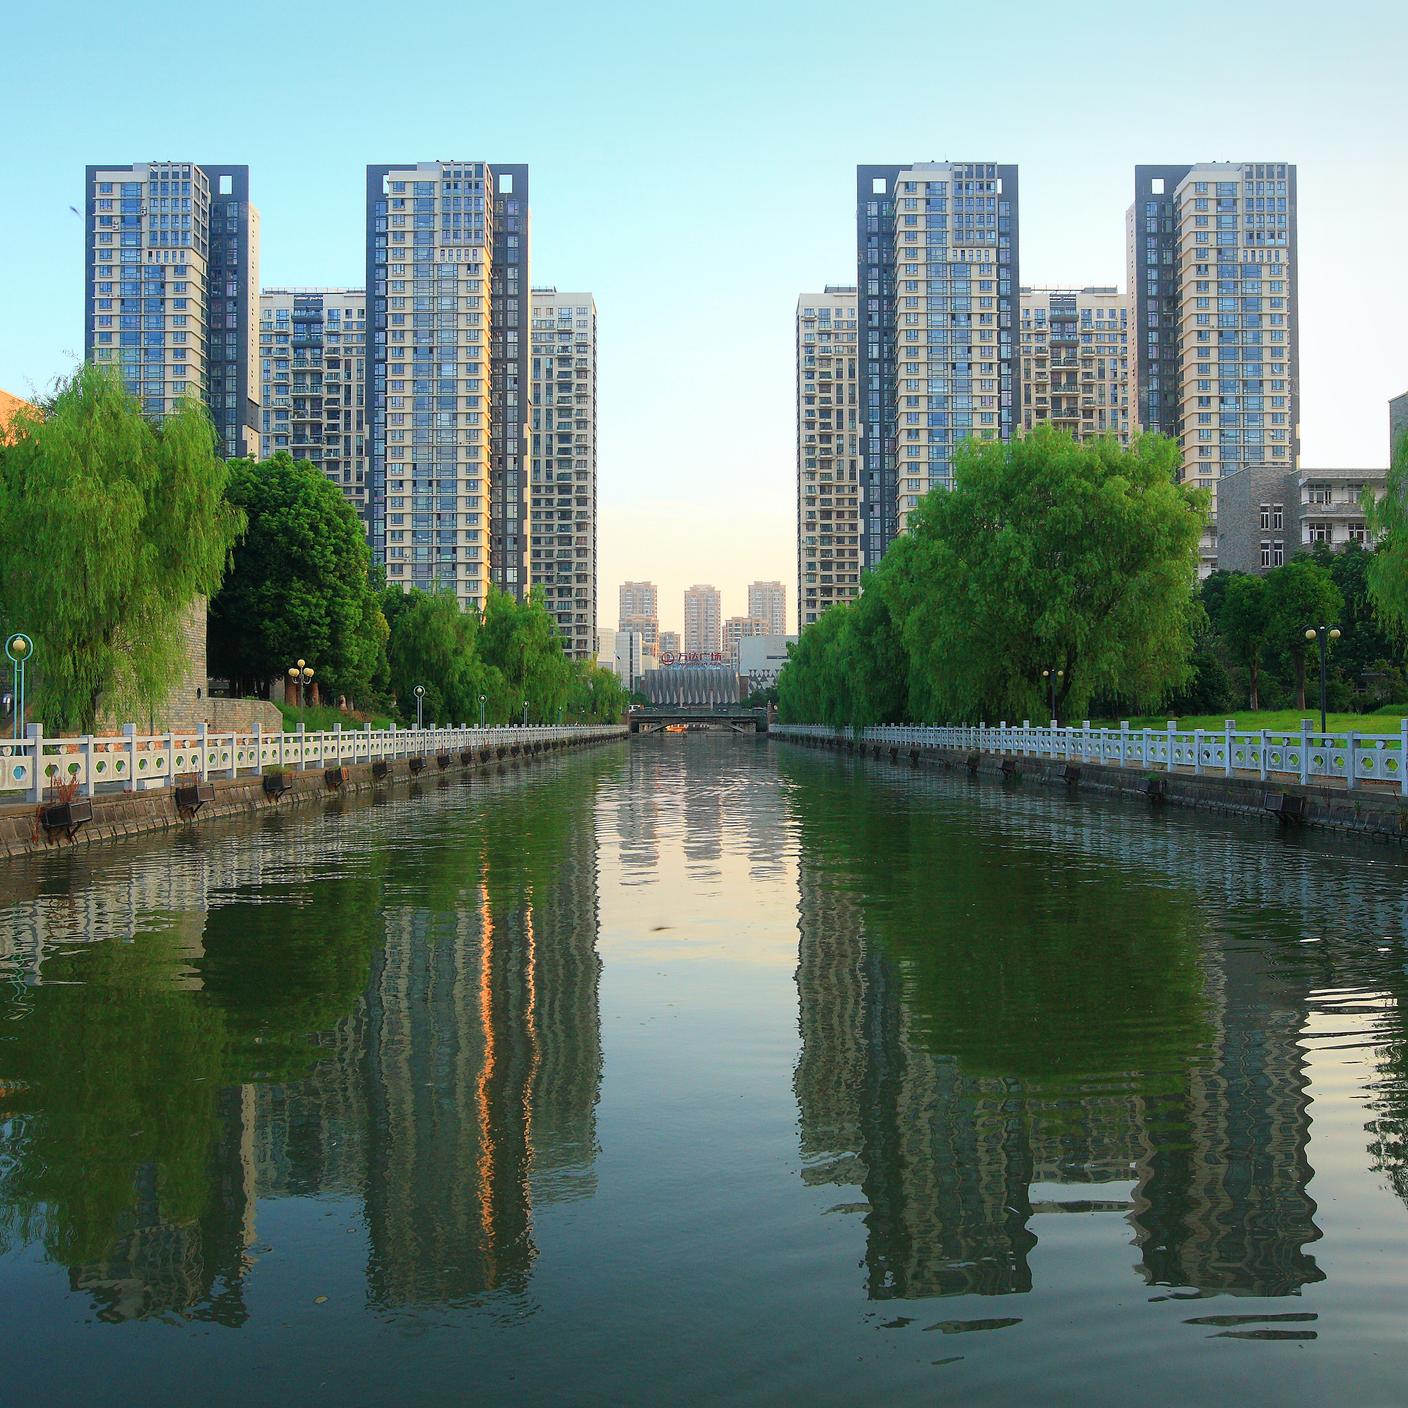 Built Environnment : buildings surrounded by water